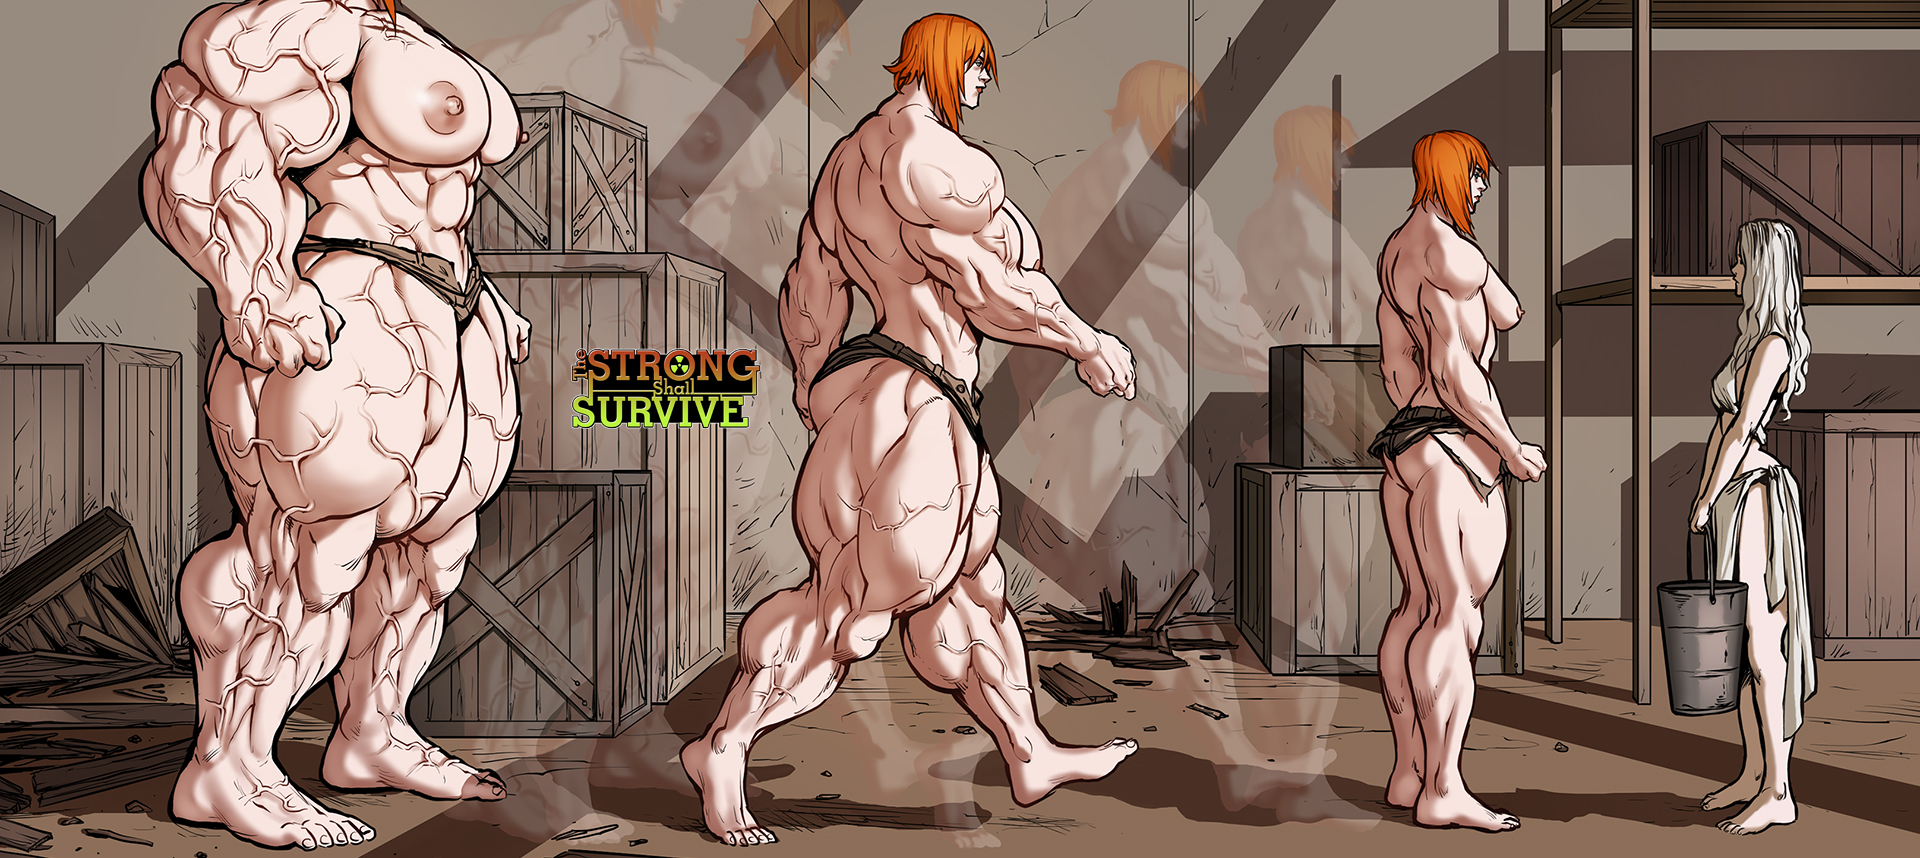 The-Strong-Shall-Survive_03-SLIDEc